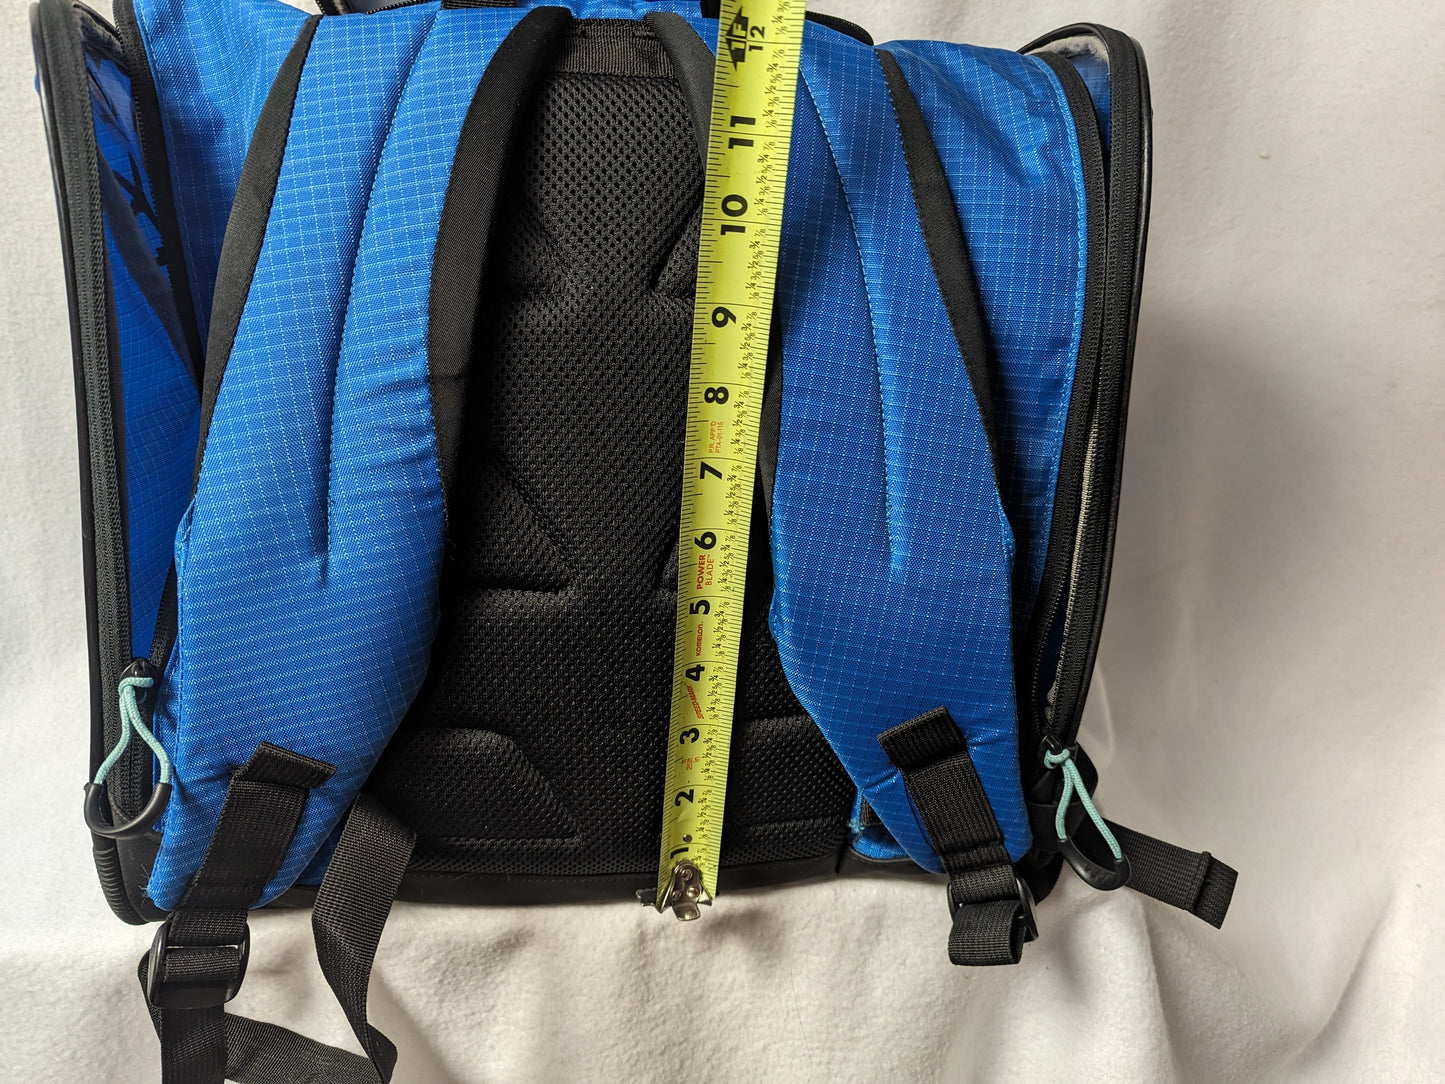 Kulkea Ski Boot Bag w/Shoulder and Backpack Straps Size 14 In x 14 In x 12 In Color Blue Condition Used